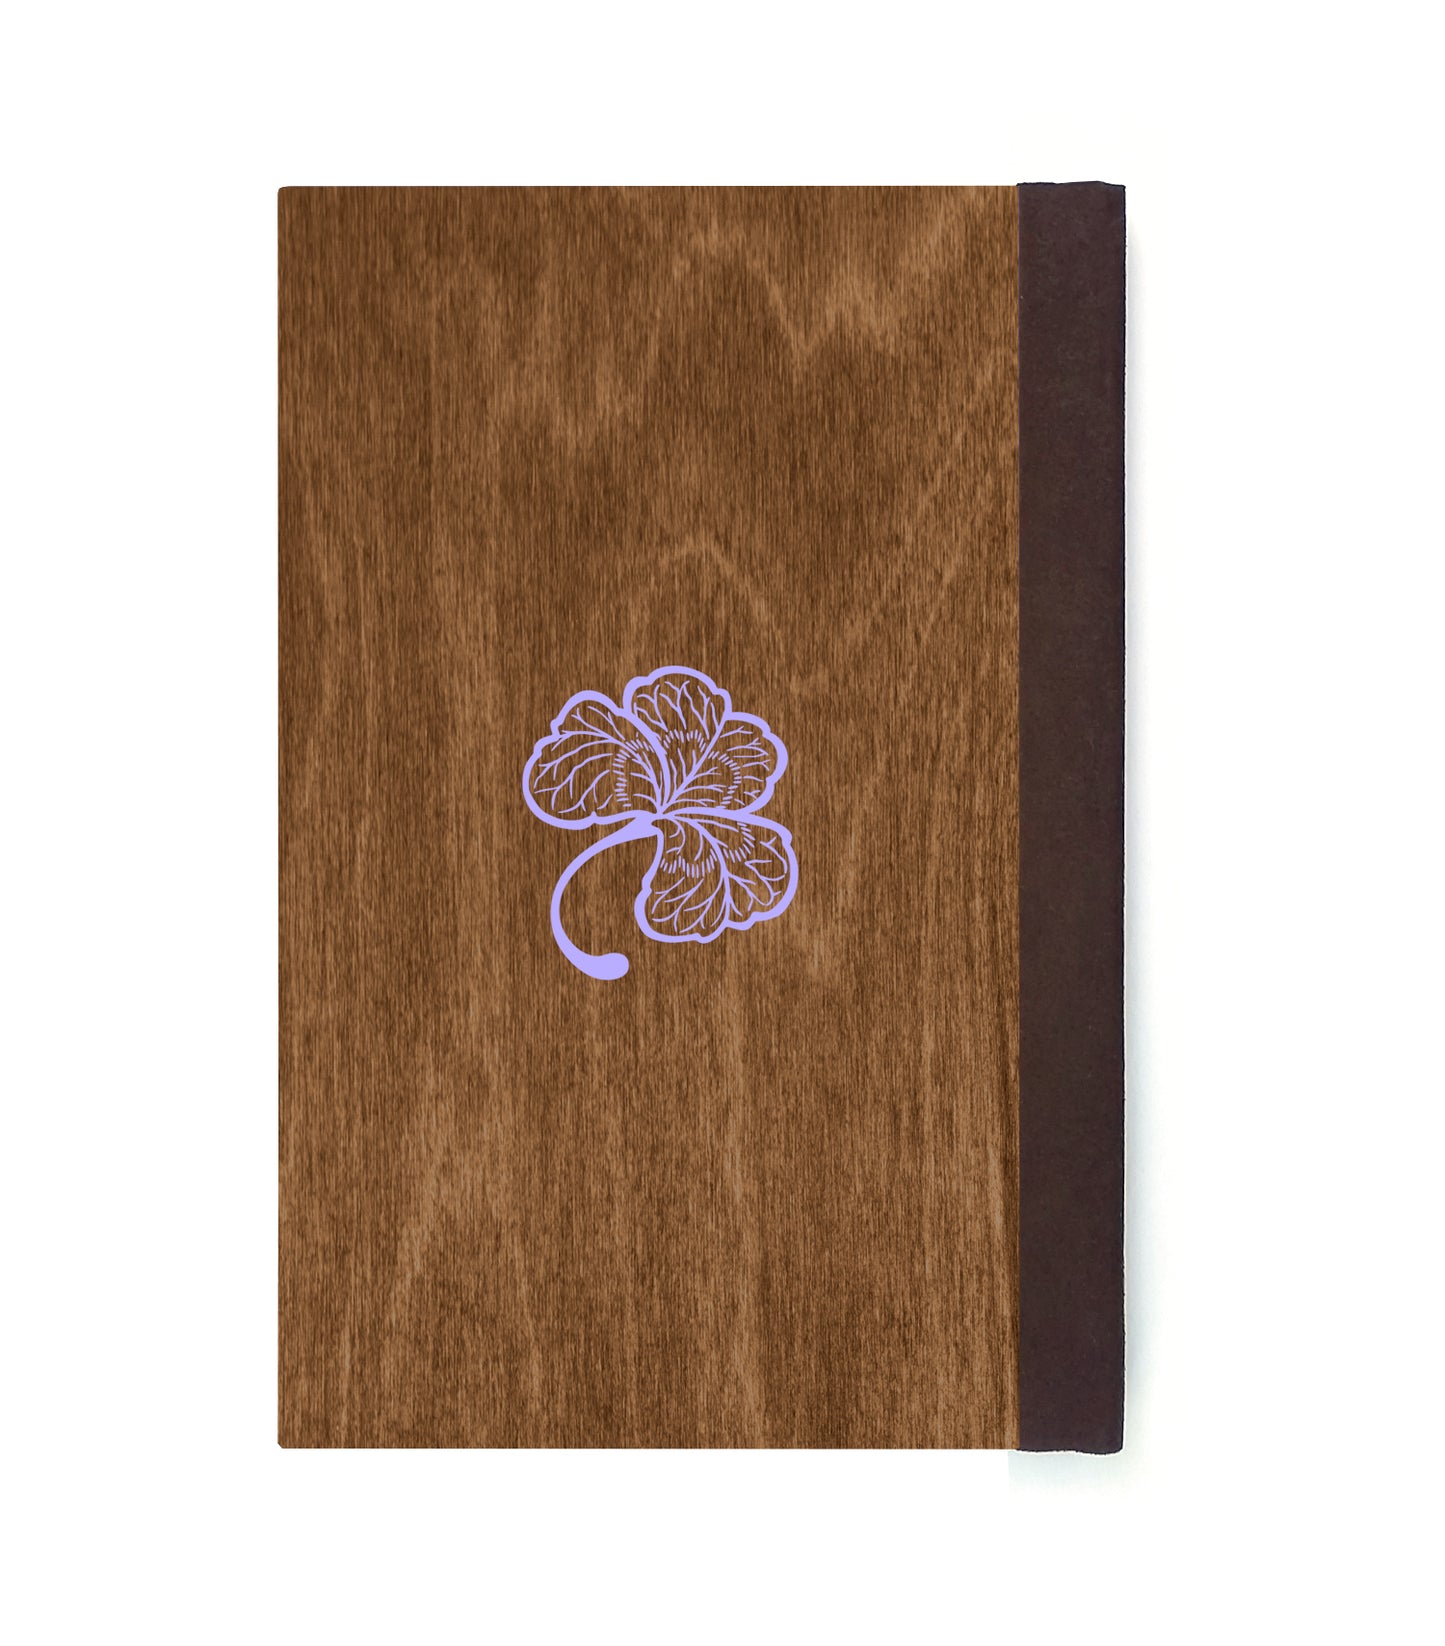 Daydreaming Bunny Magnetic Wooden Journal, Brown & Lavender